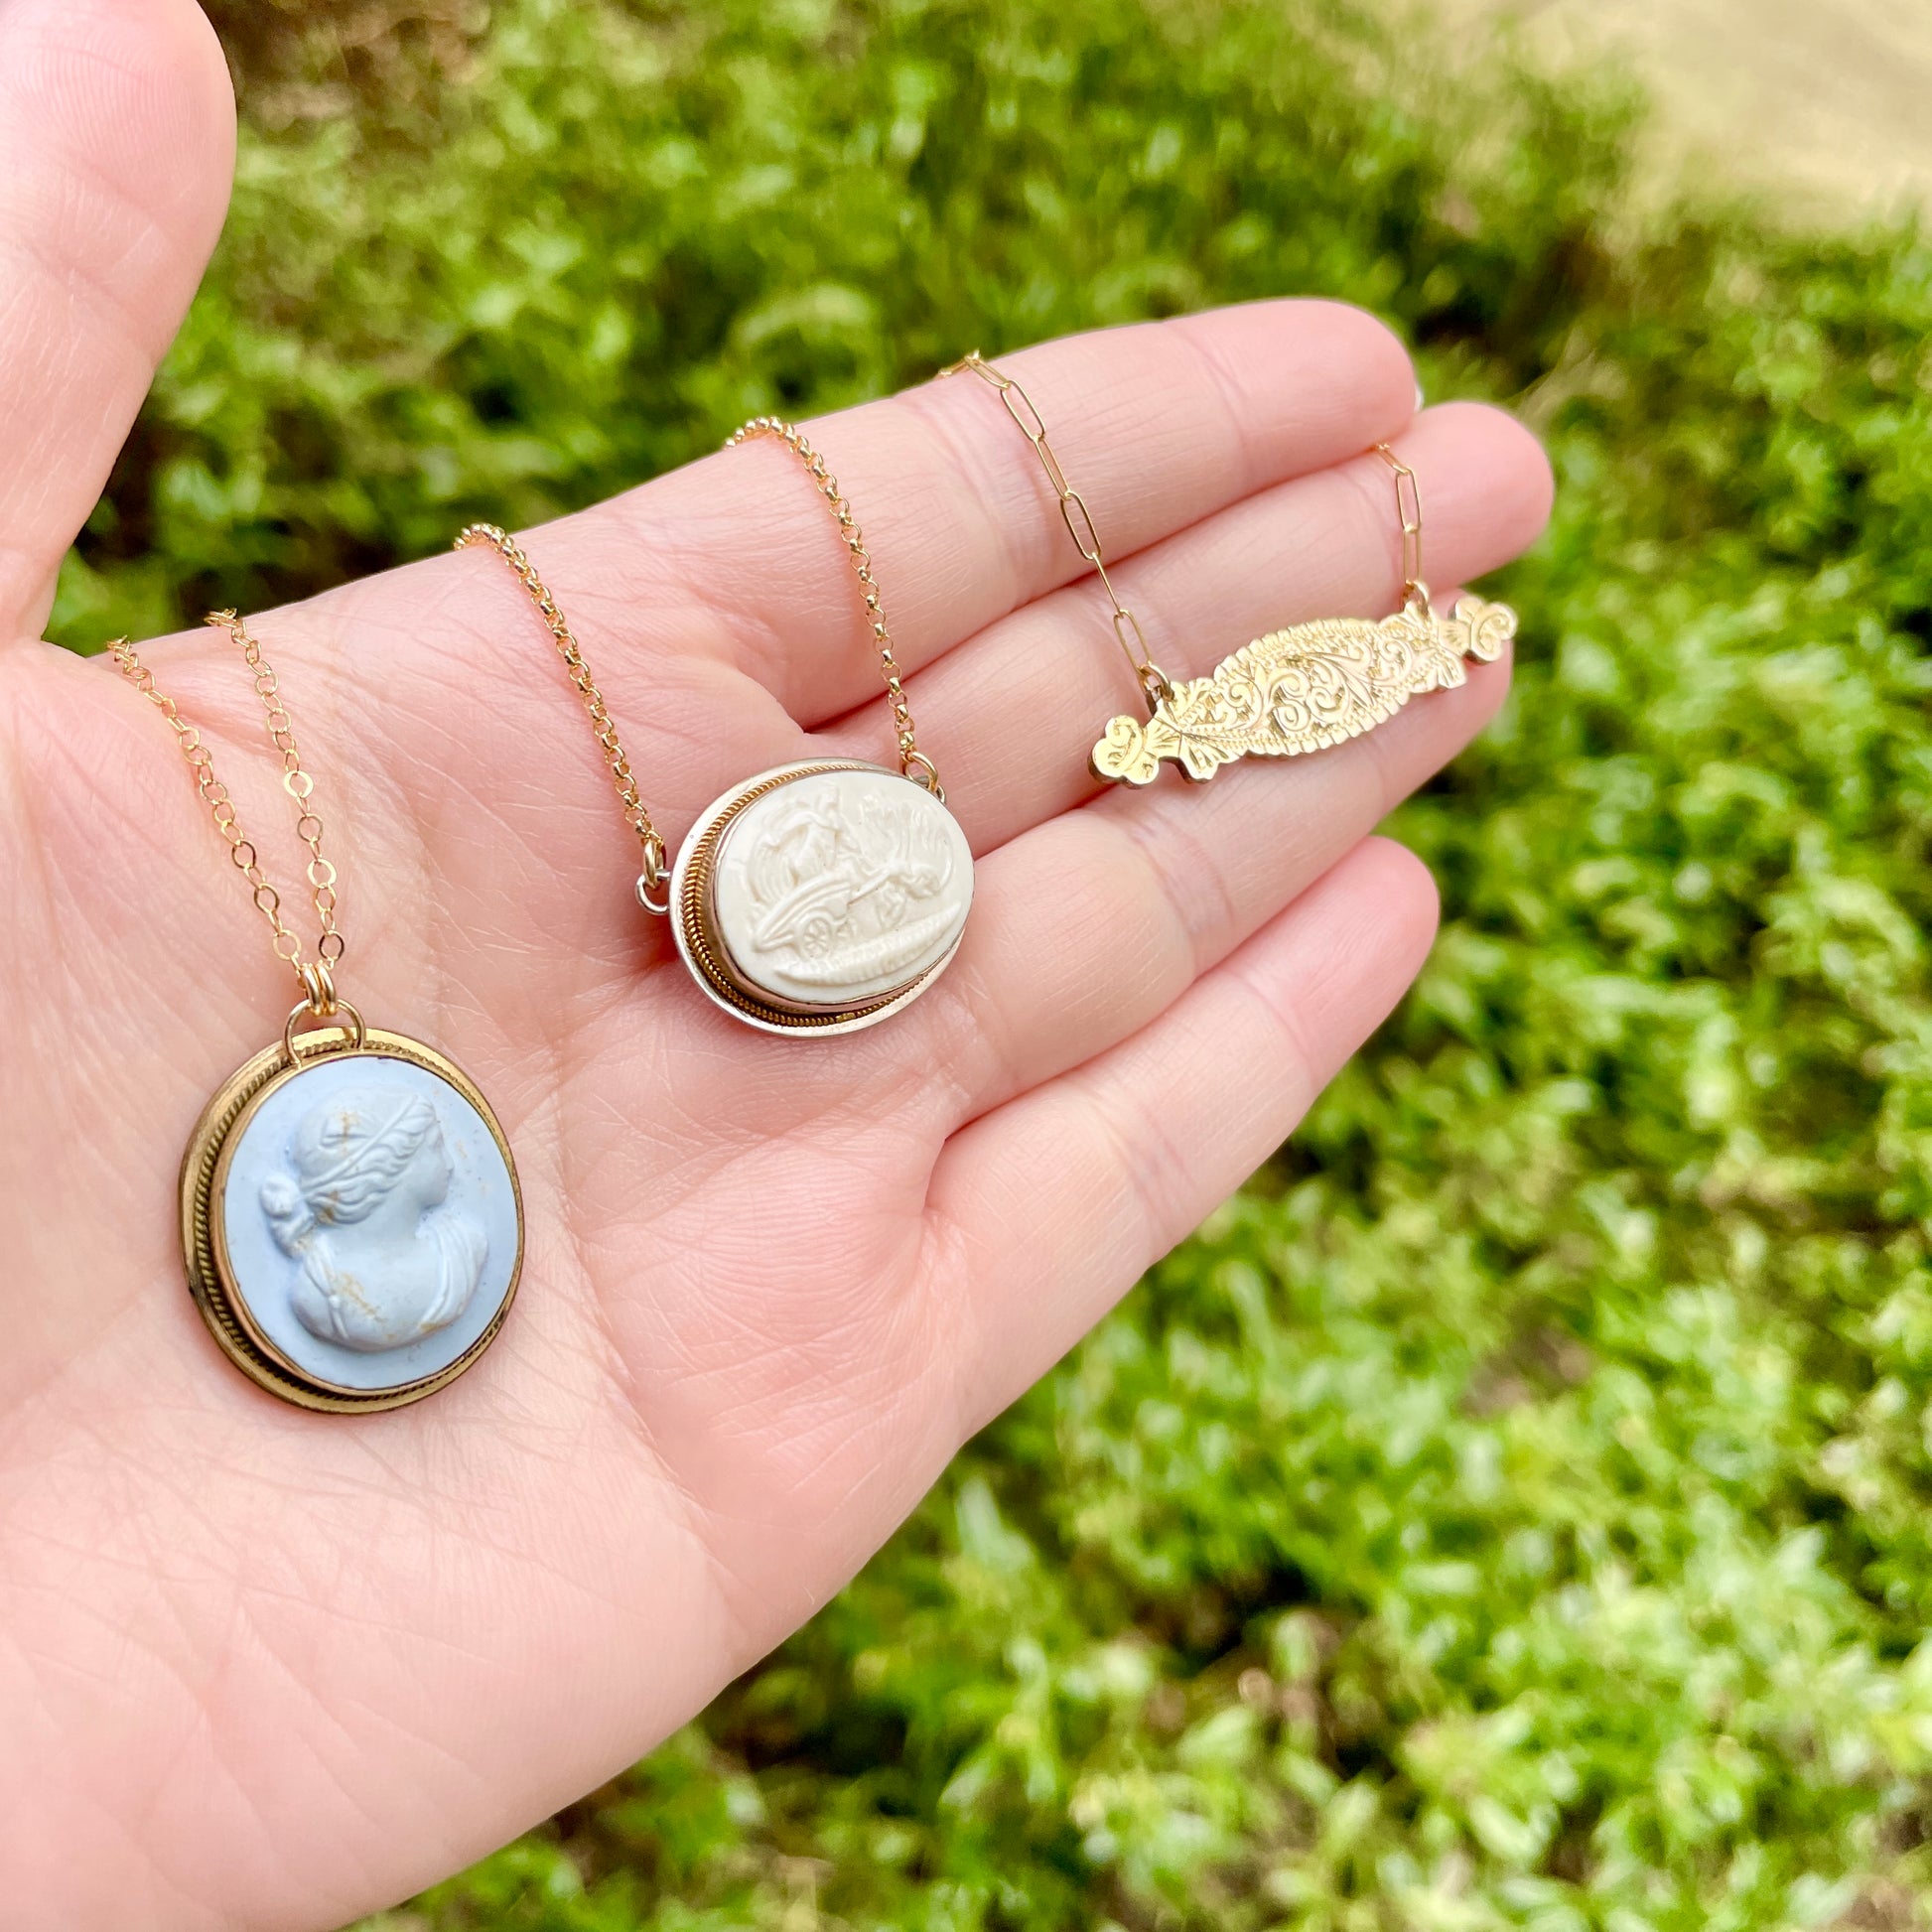 3 antique brooch conversion necklaces, including 2 with porcelain cameos. All on 14k gold filled chains.